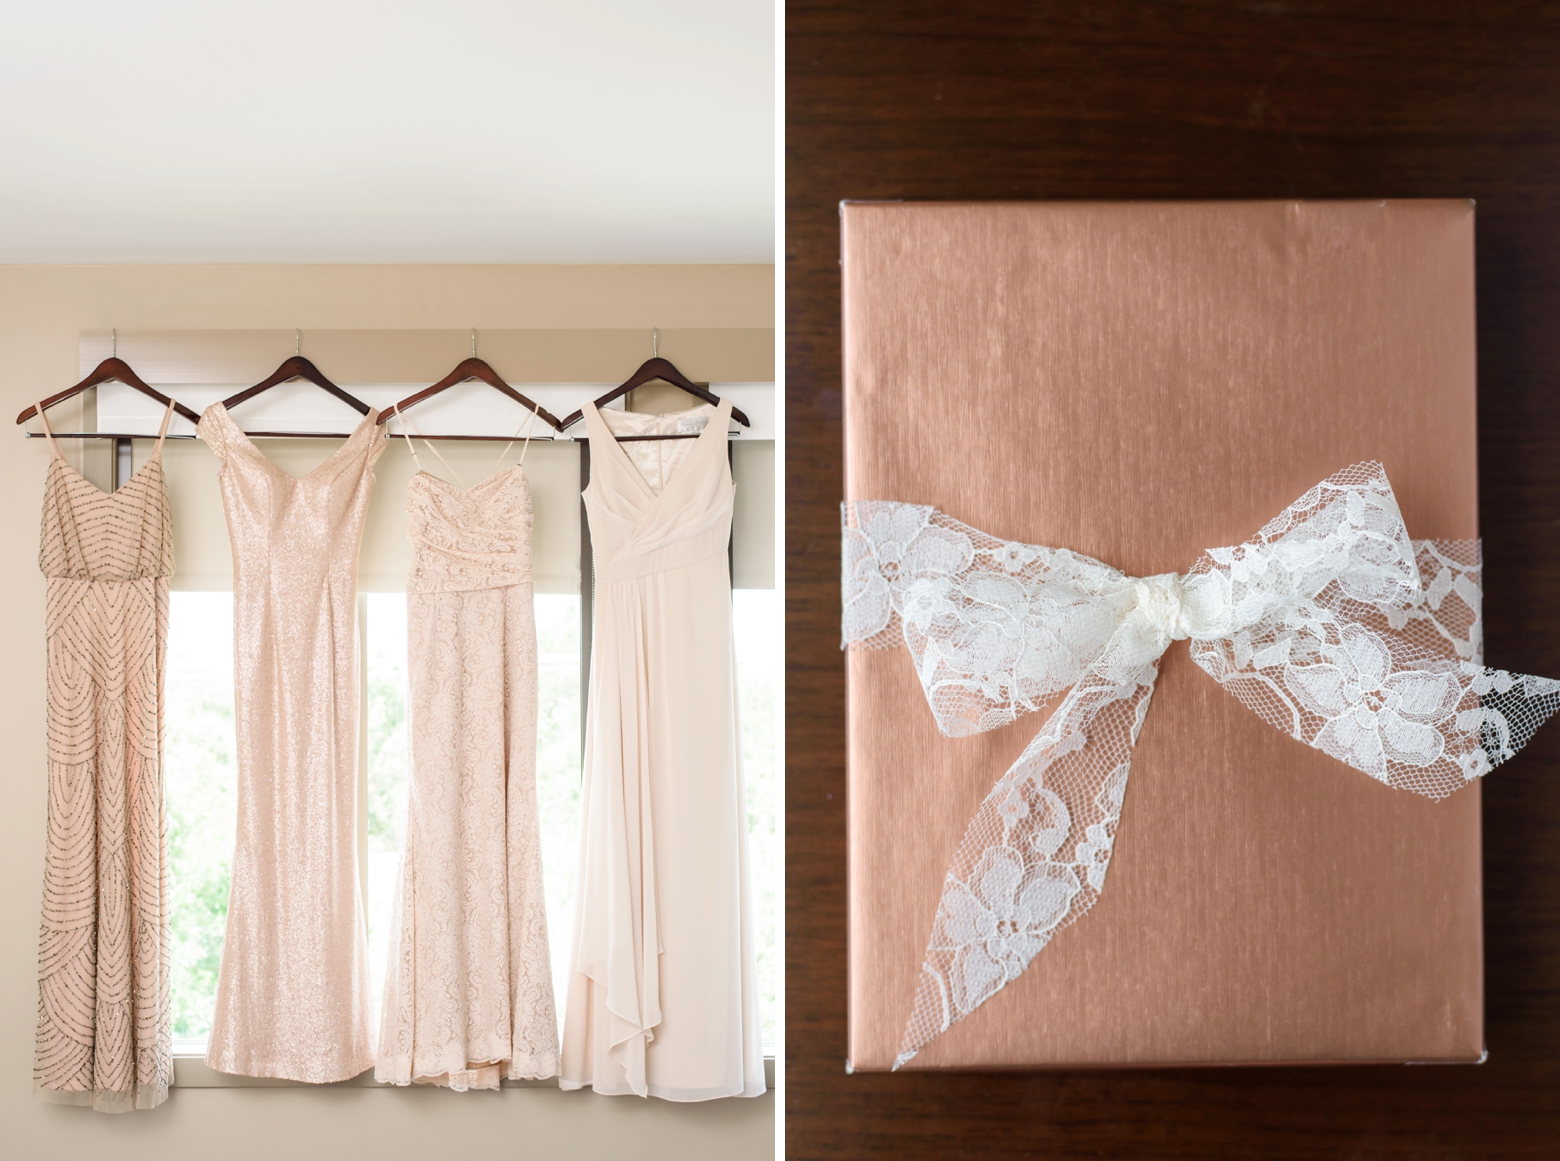 Bridesmaids dresses hanging in front of a window and the gift box for the Bride